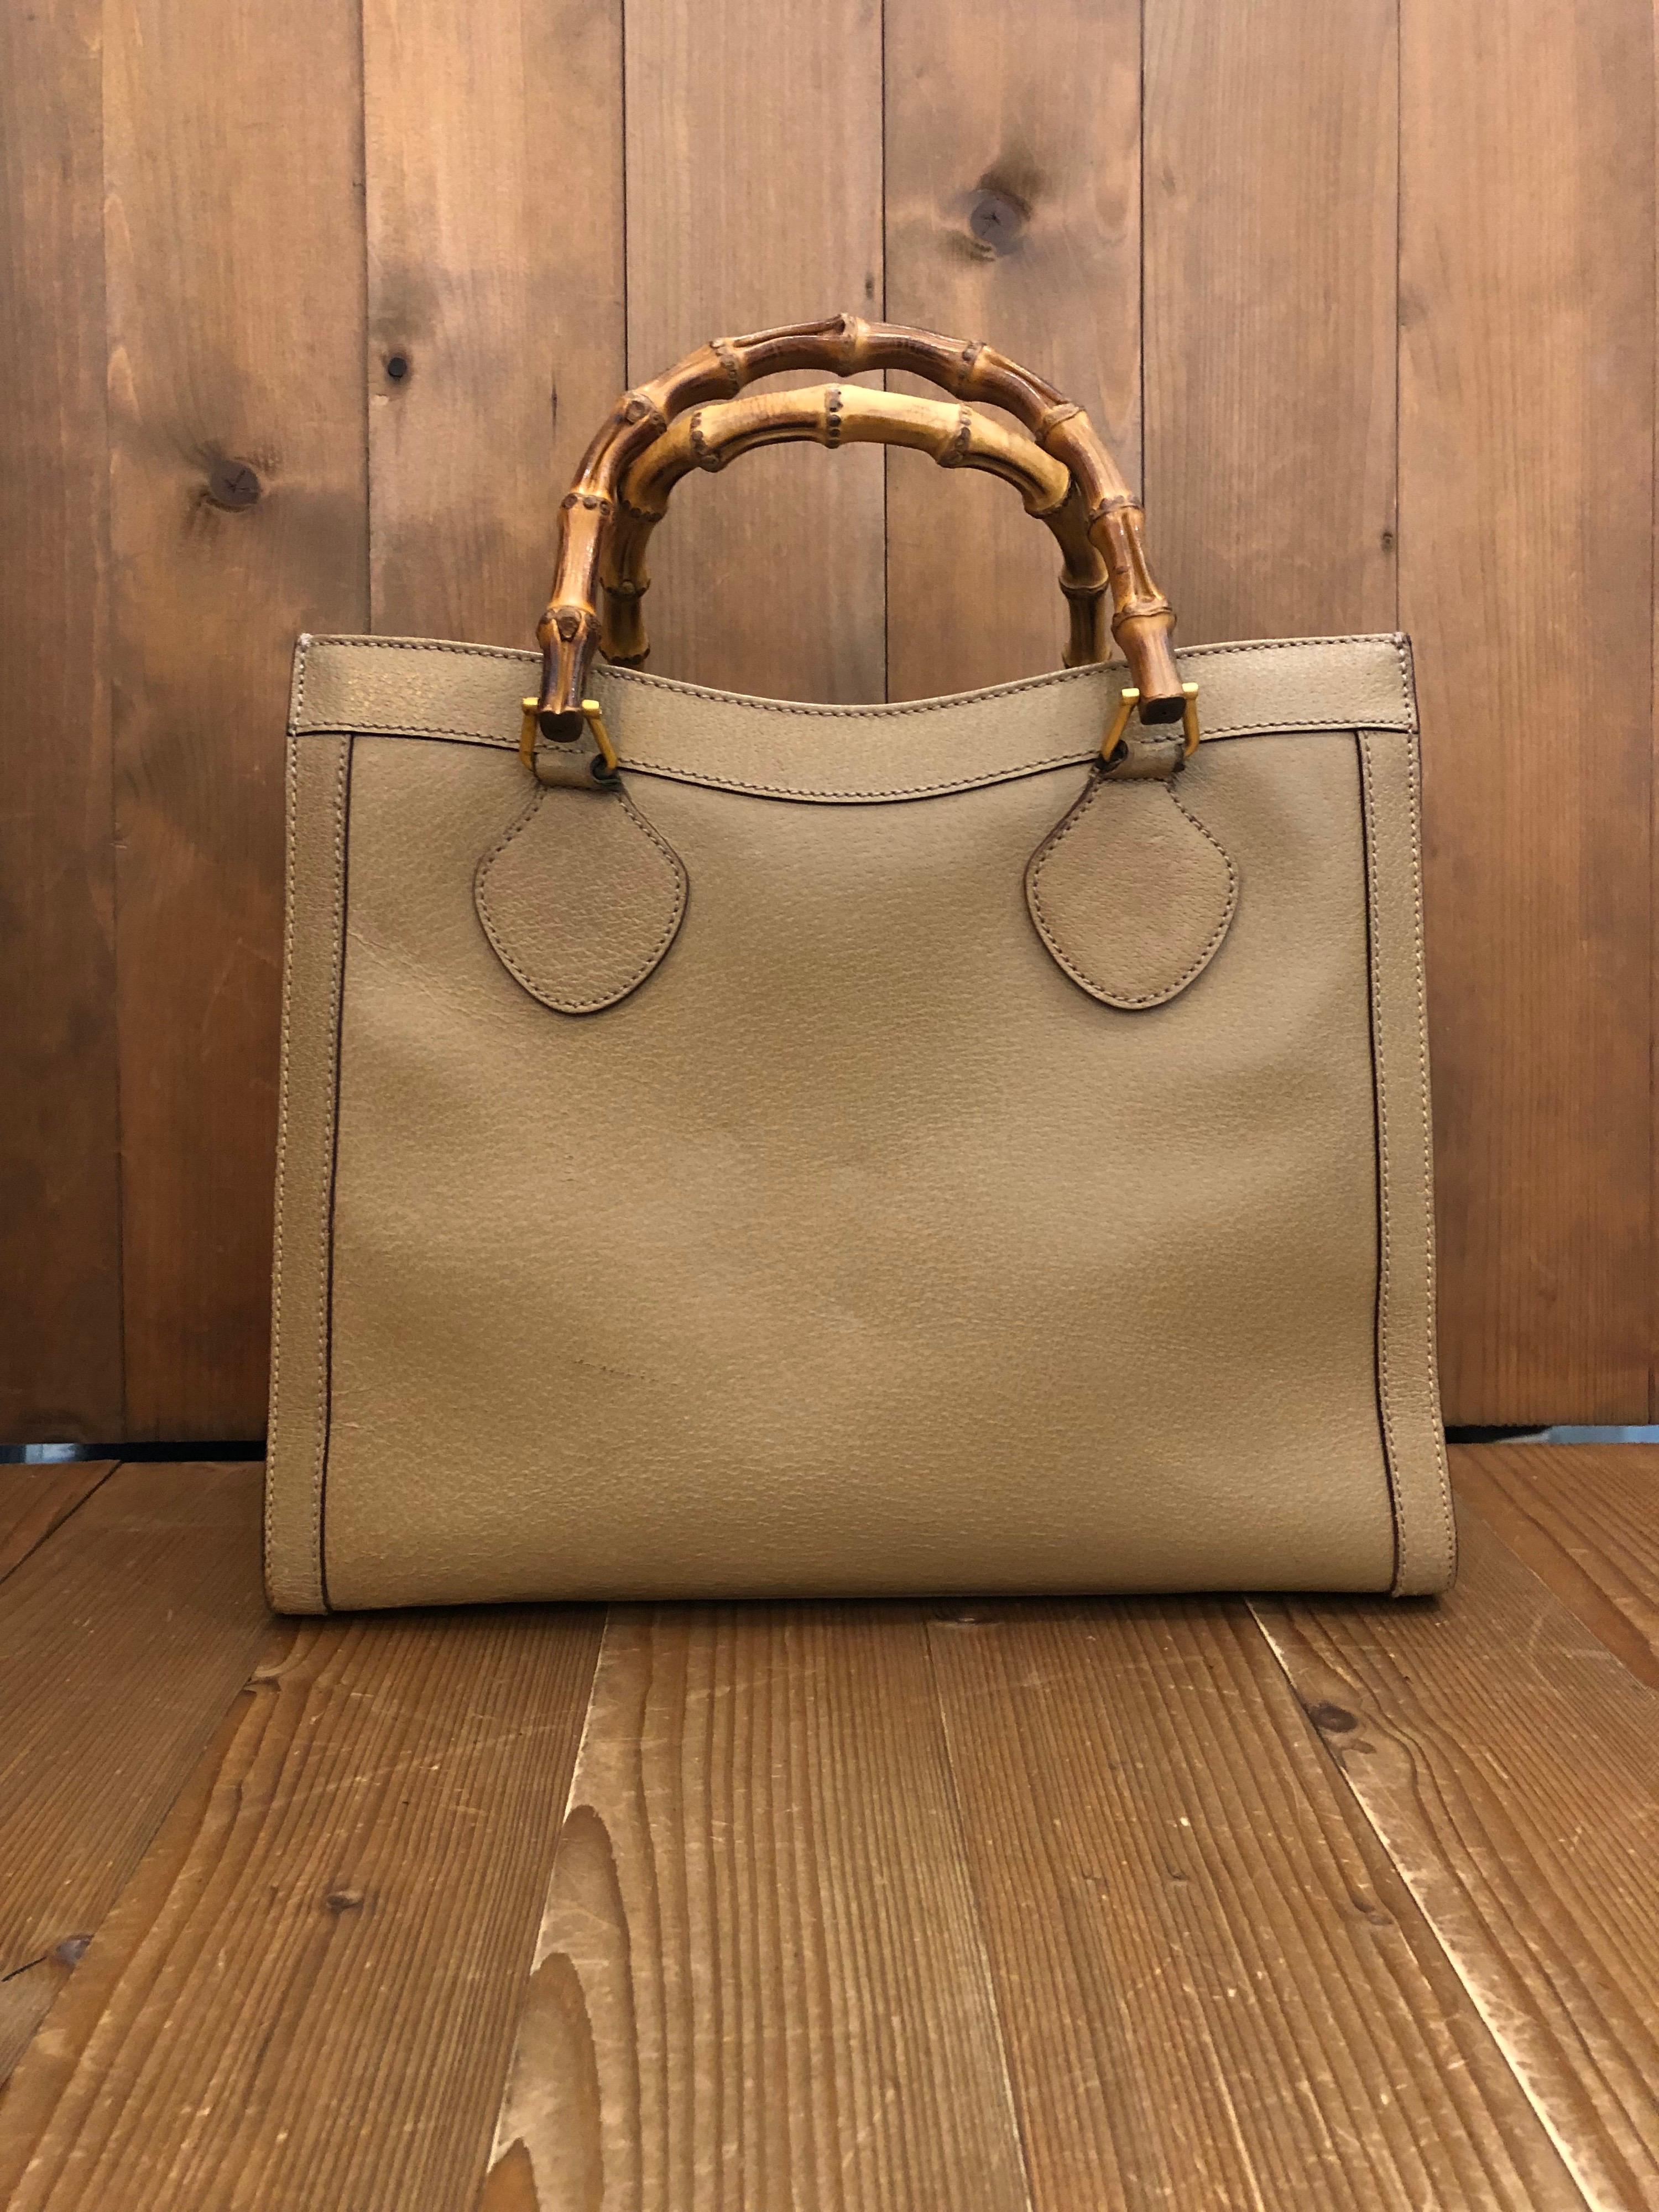 1990s Gucci bamboo tote in khaki leather. The Bamboo tote is one of Princess Diana's favorite purses. Gucci revamped this Bamboo tote in 2021 winter collection. Made in Italy. Measures 13 x 11 x 5.5 inches handle drop 5 inches. It features two main